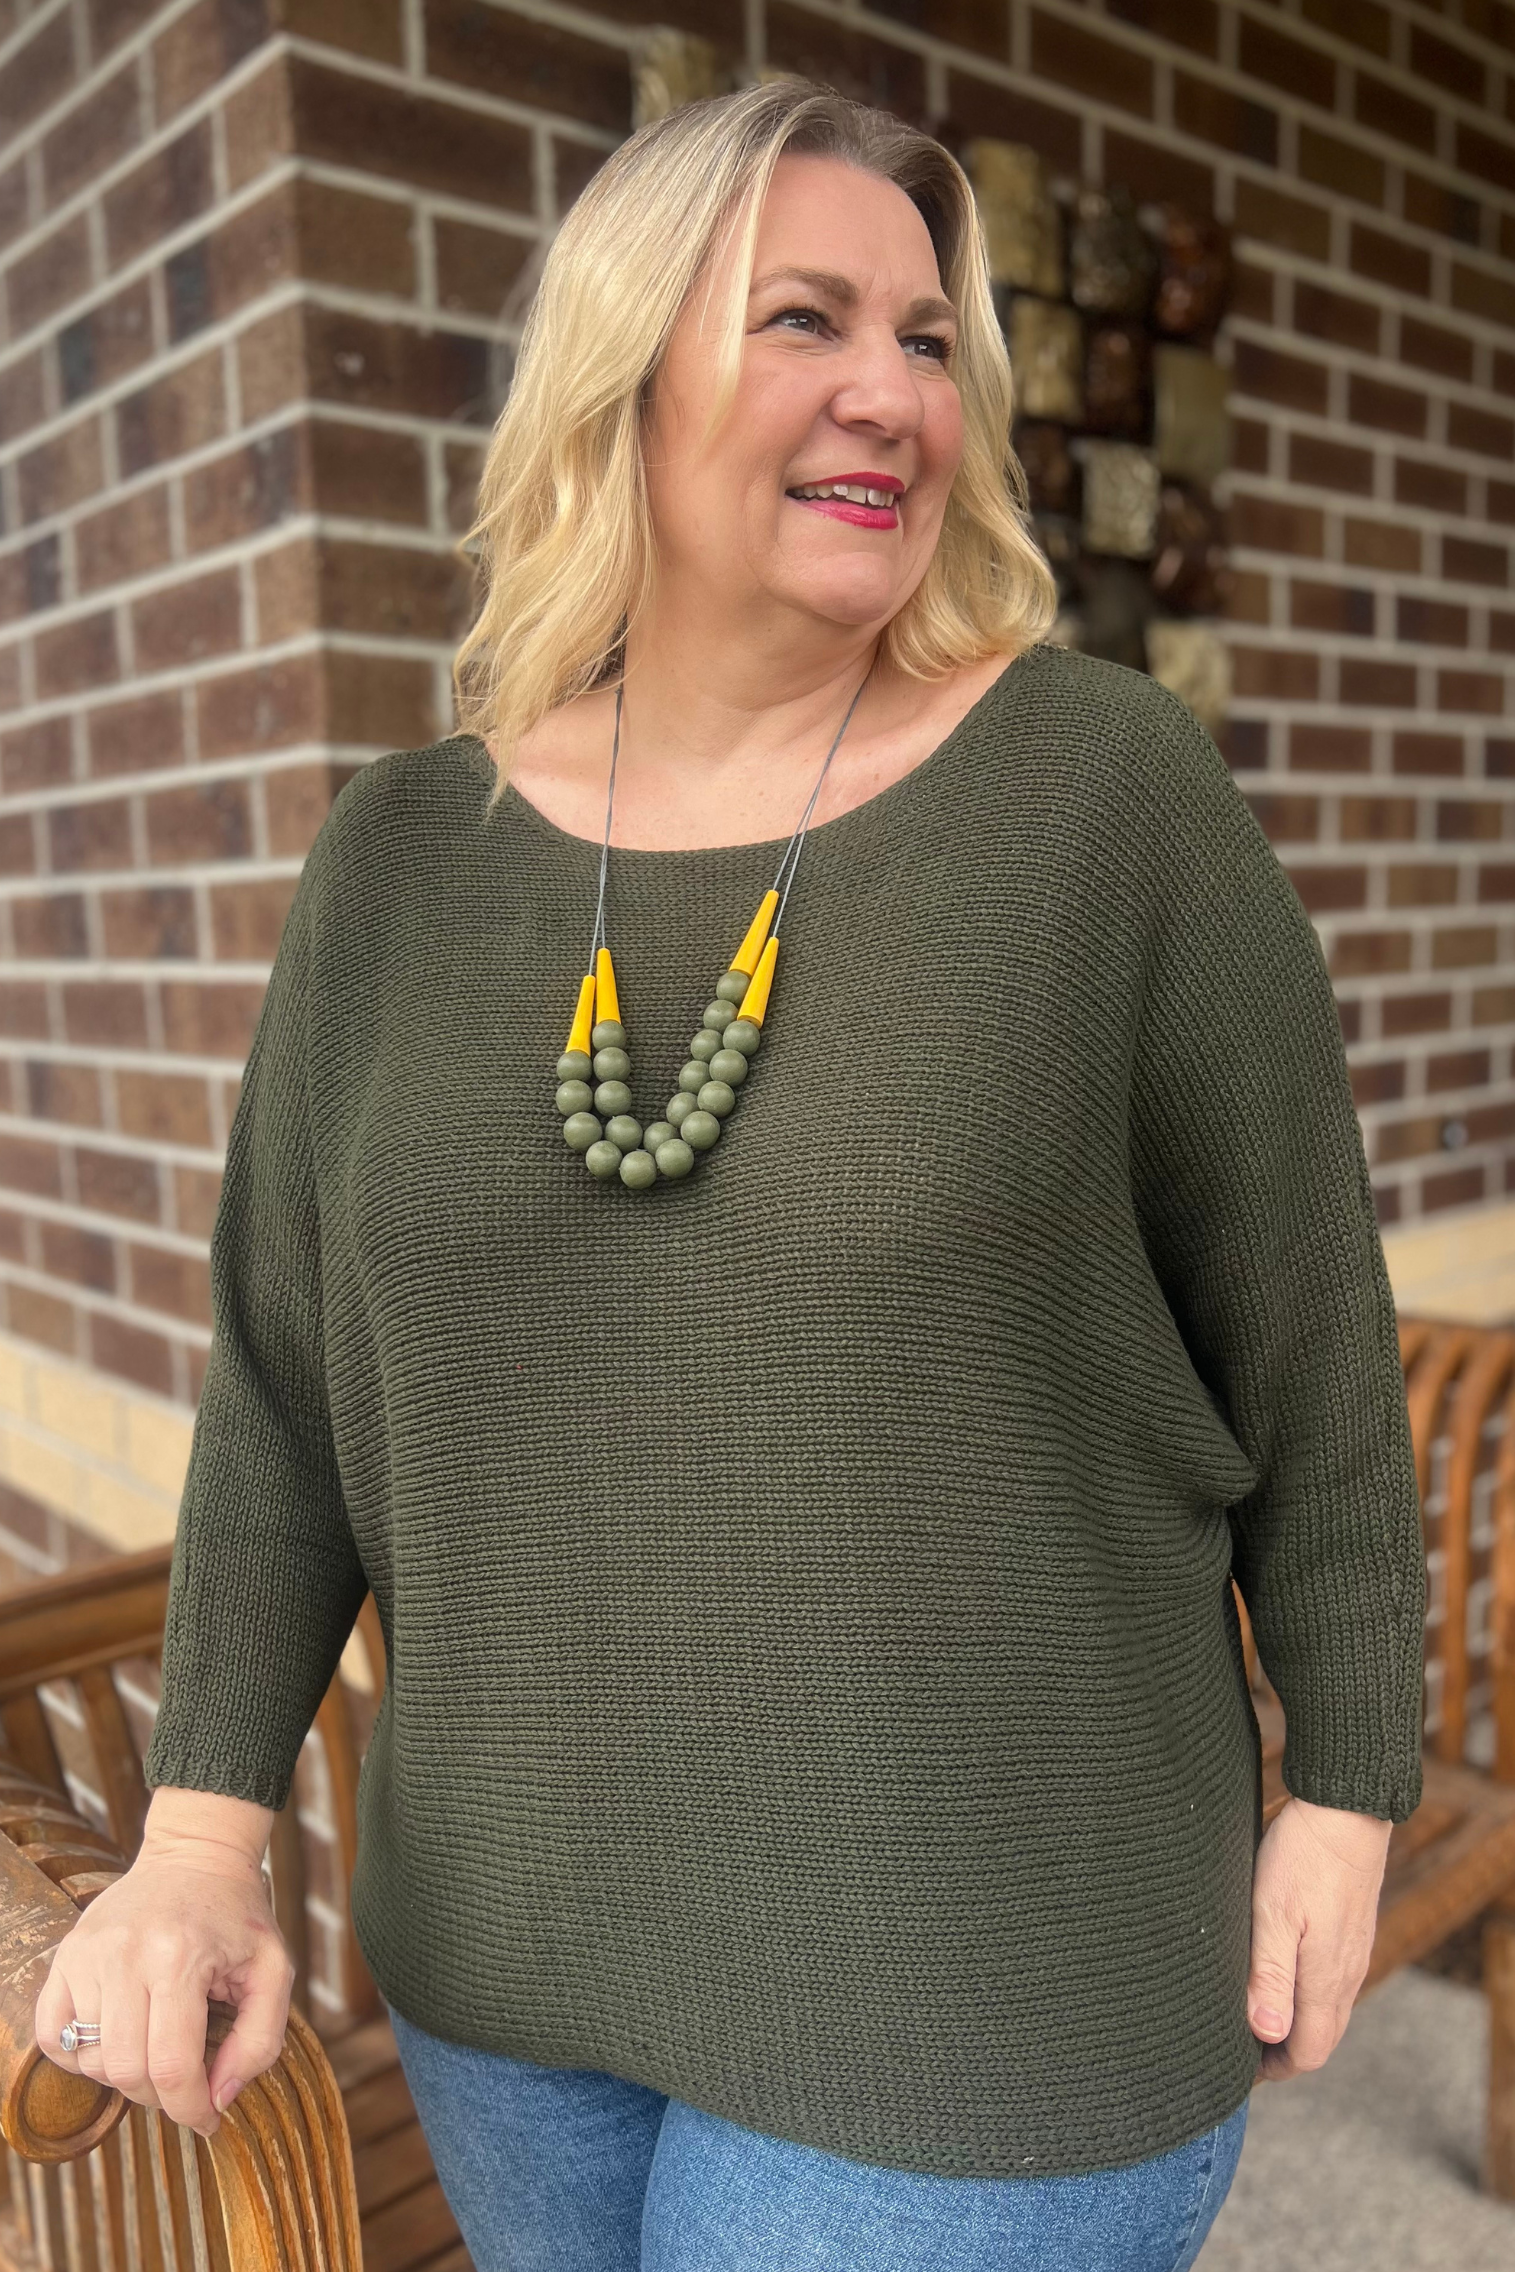 Dark green knitted boat necked top and necklace over jeans, standing on porch